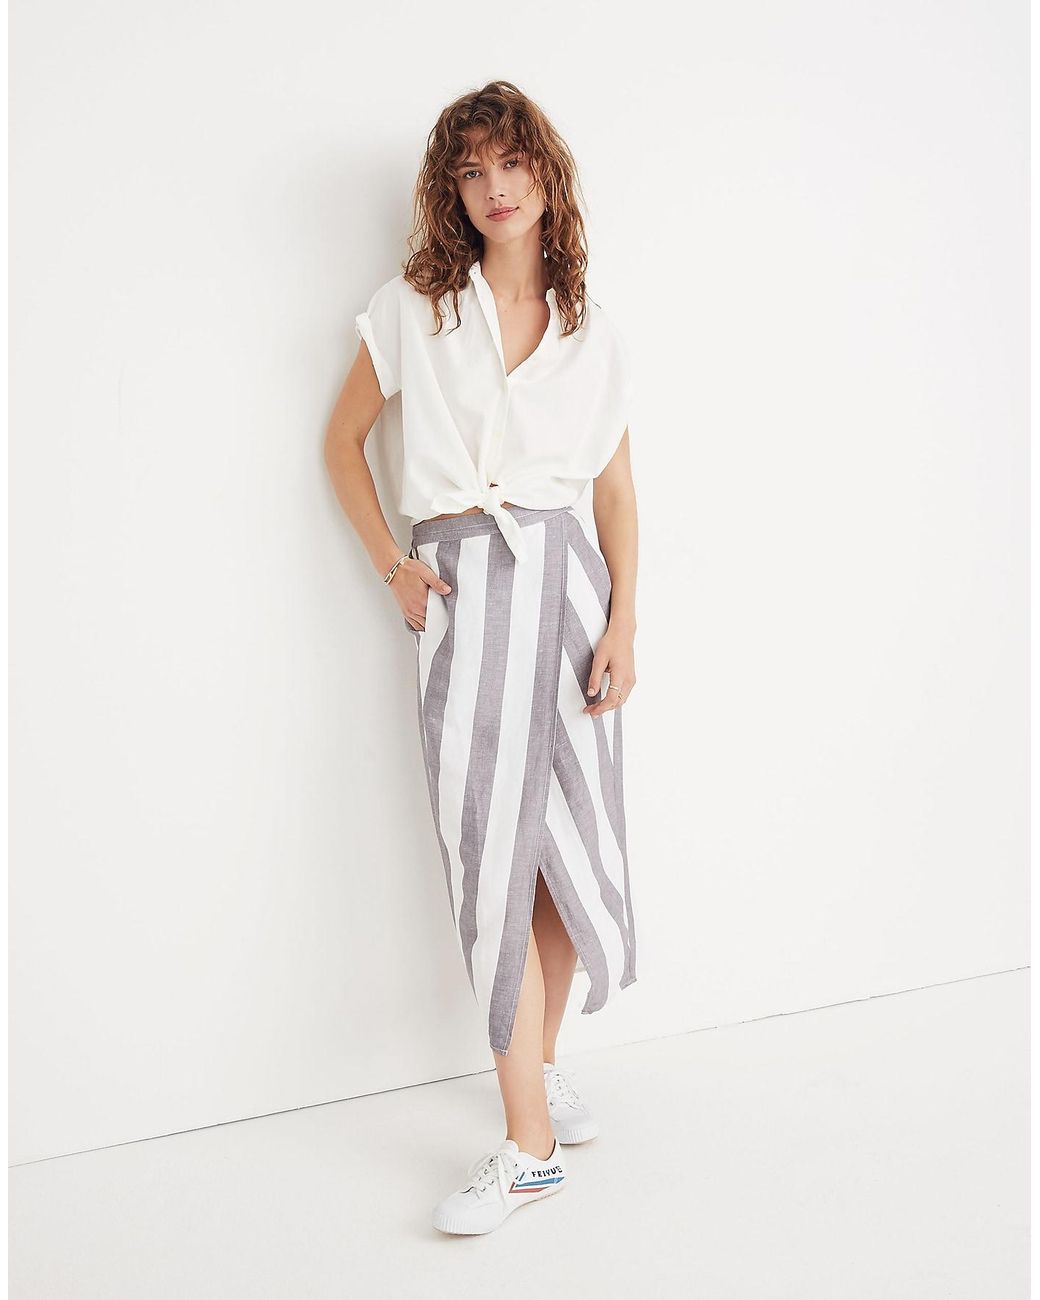 MW Striped Overlay Skirt in White | Lyst